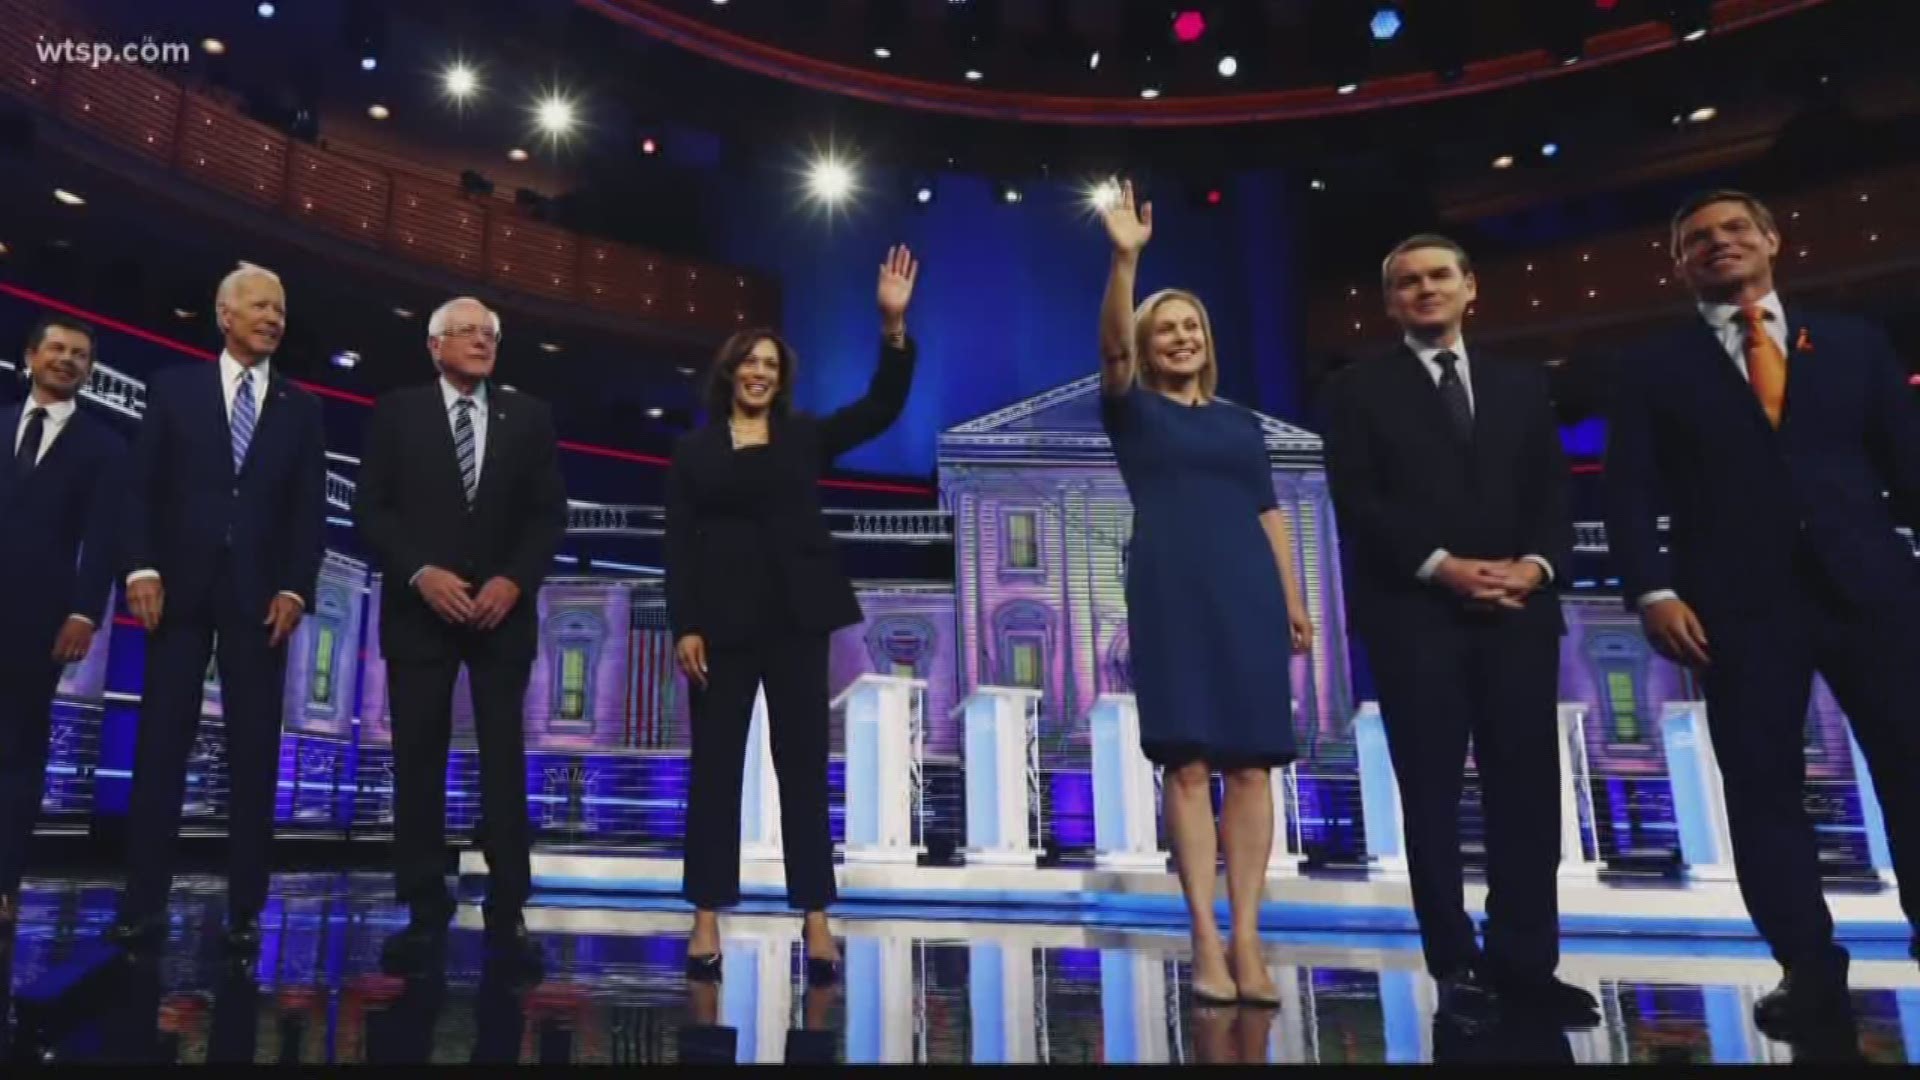 Democrats gathering in Detroit for a pivotal presidential debate will have to decide how to respond to President Donald Trump while presenting their own vision for the country.

Candidates are sure to use the setting tonight and Wednesday night to blast Trump's recent string of tweets and comments, first about four congresswomen and more recently about Baltimore. https://on.wtsp.com/2ZkOyT8